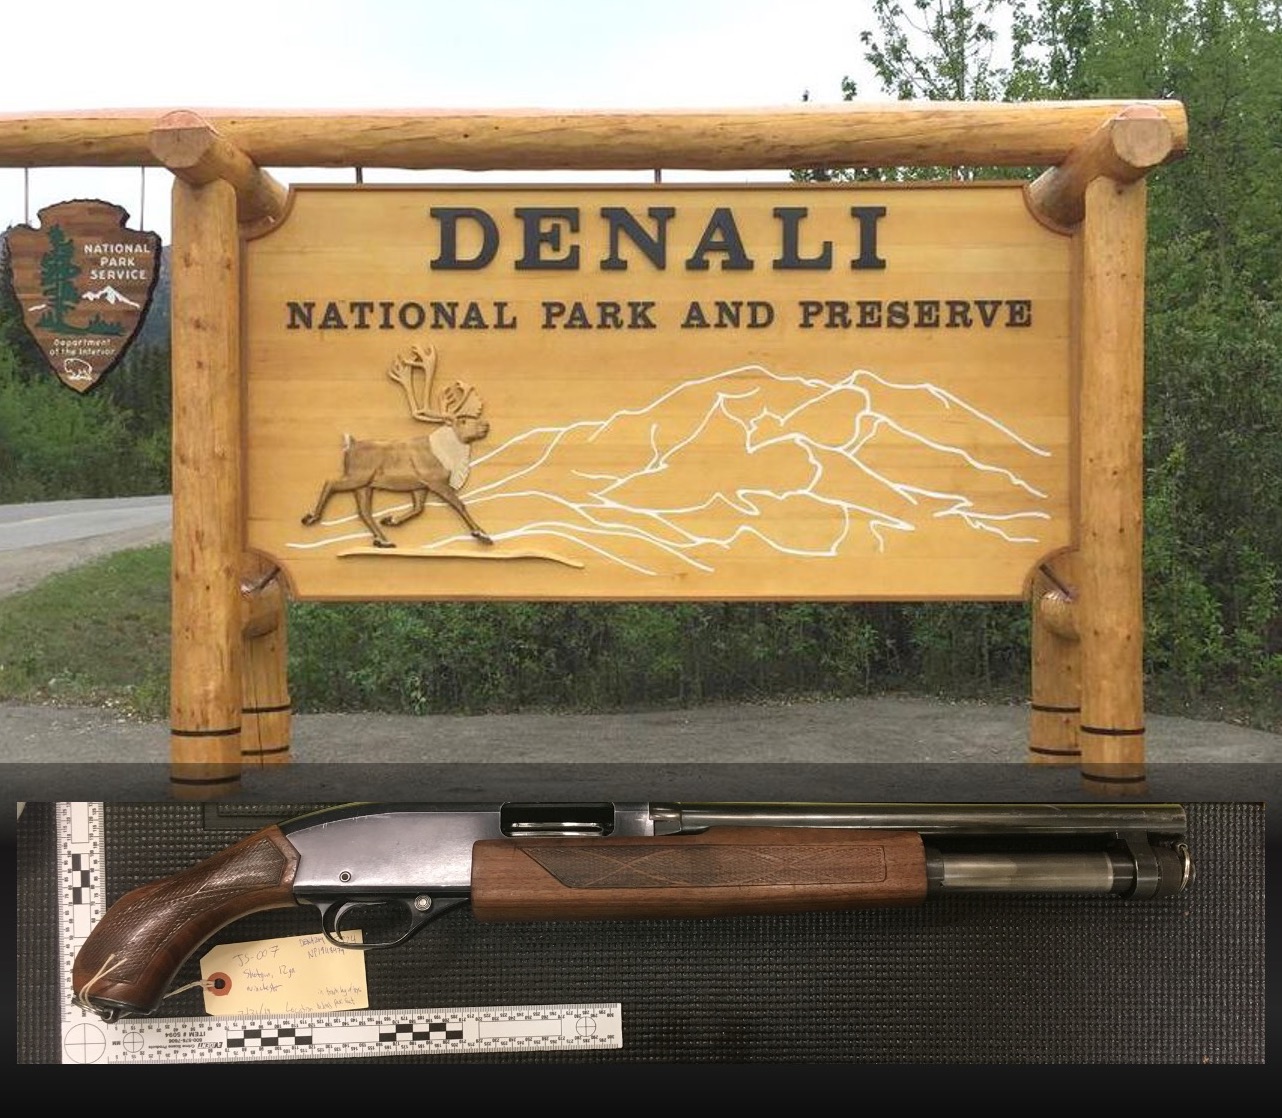 An entrance sign in Denali National Park, and an image of the unlawfully modified shotgun involved in this case. NPS photos.